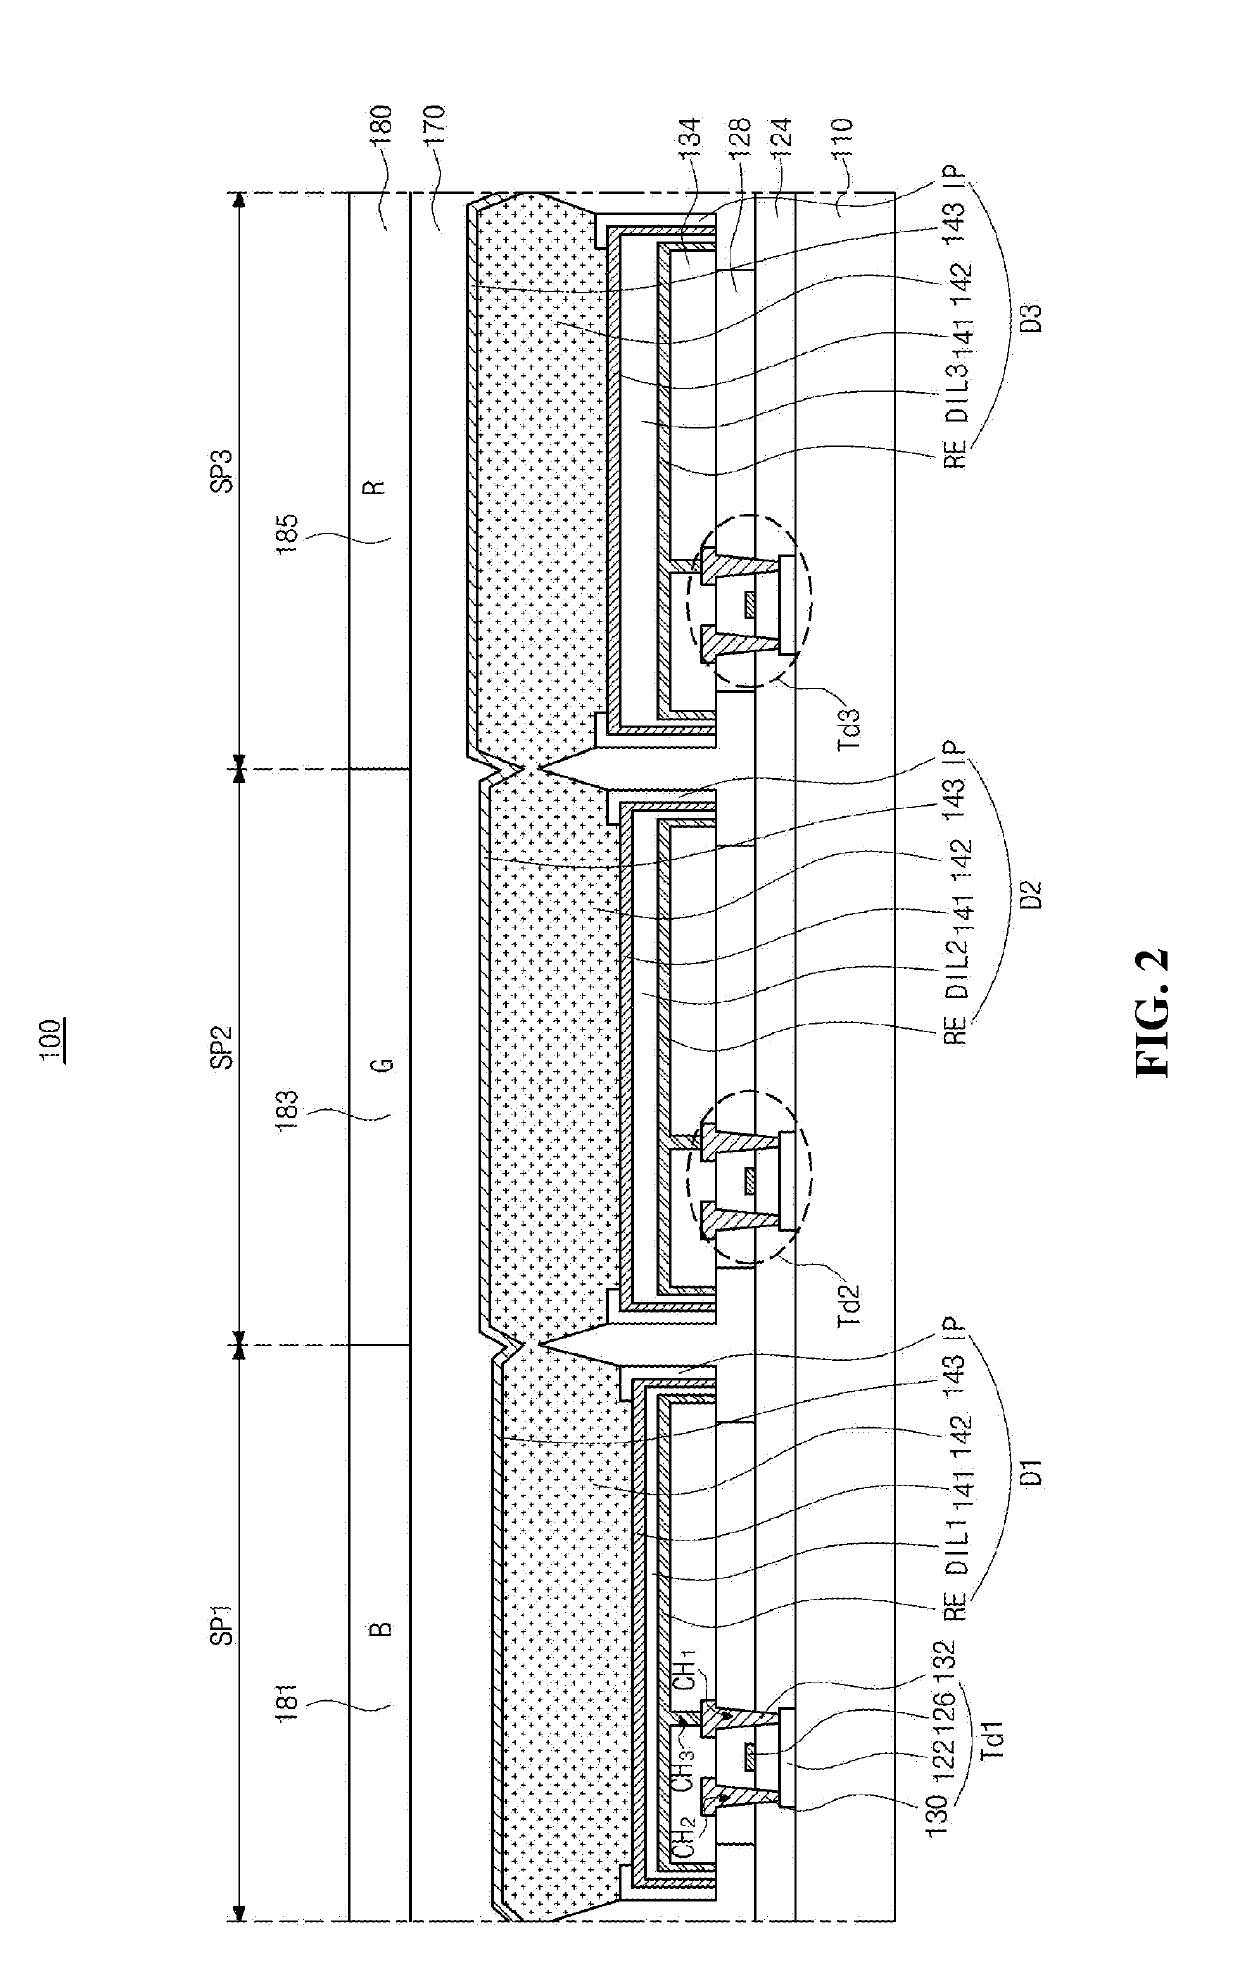 Electroluminescent display device